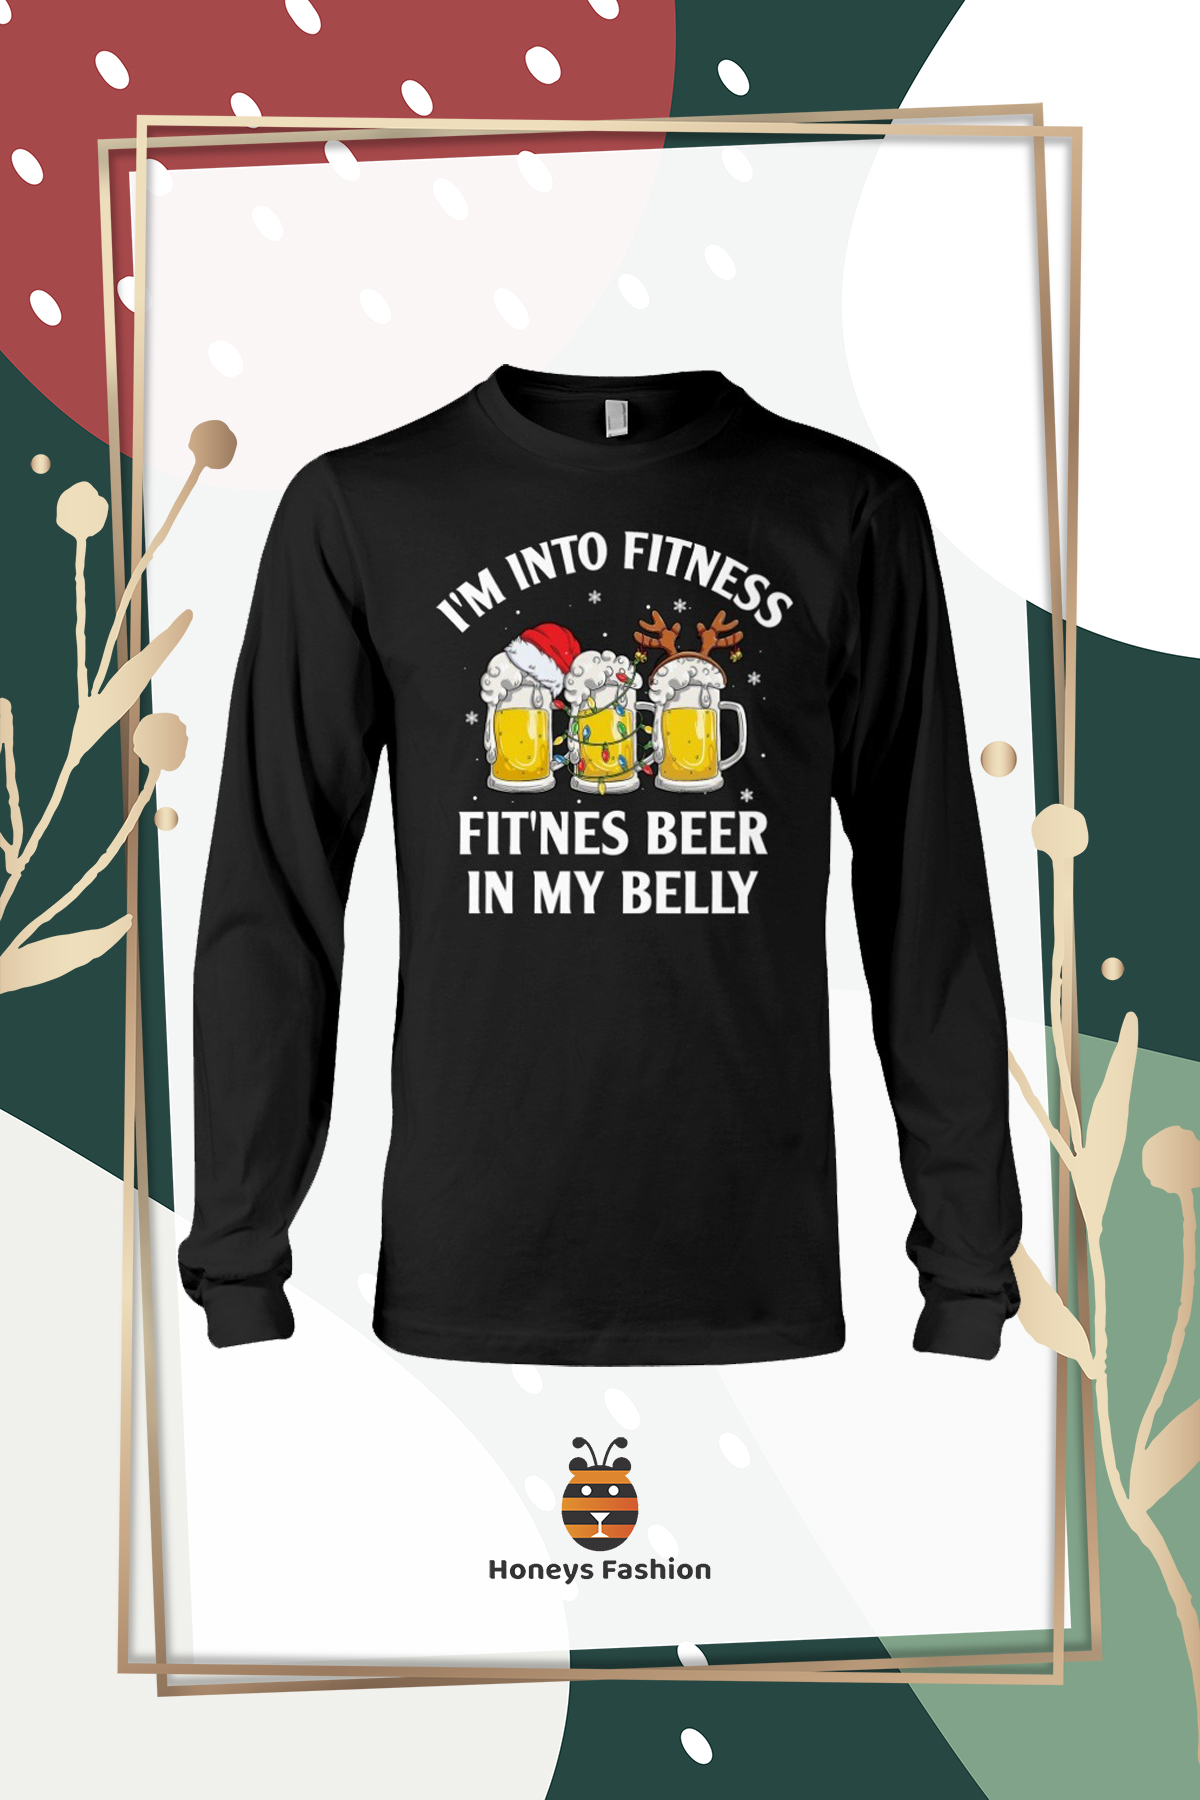 I’m Into Fitness Fit’nes Beer In My Belly Hoodie Shirt